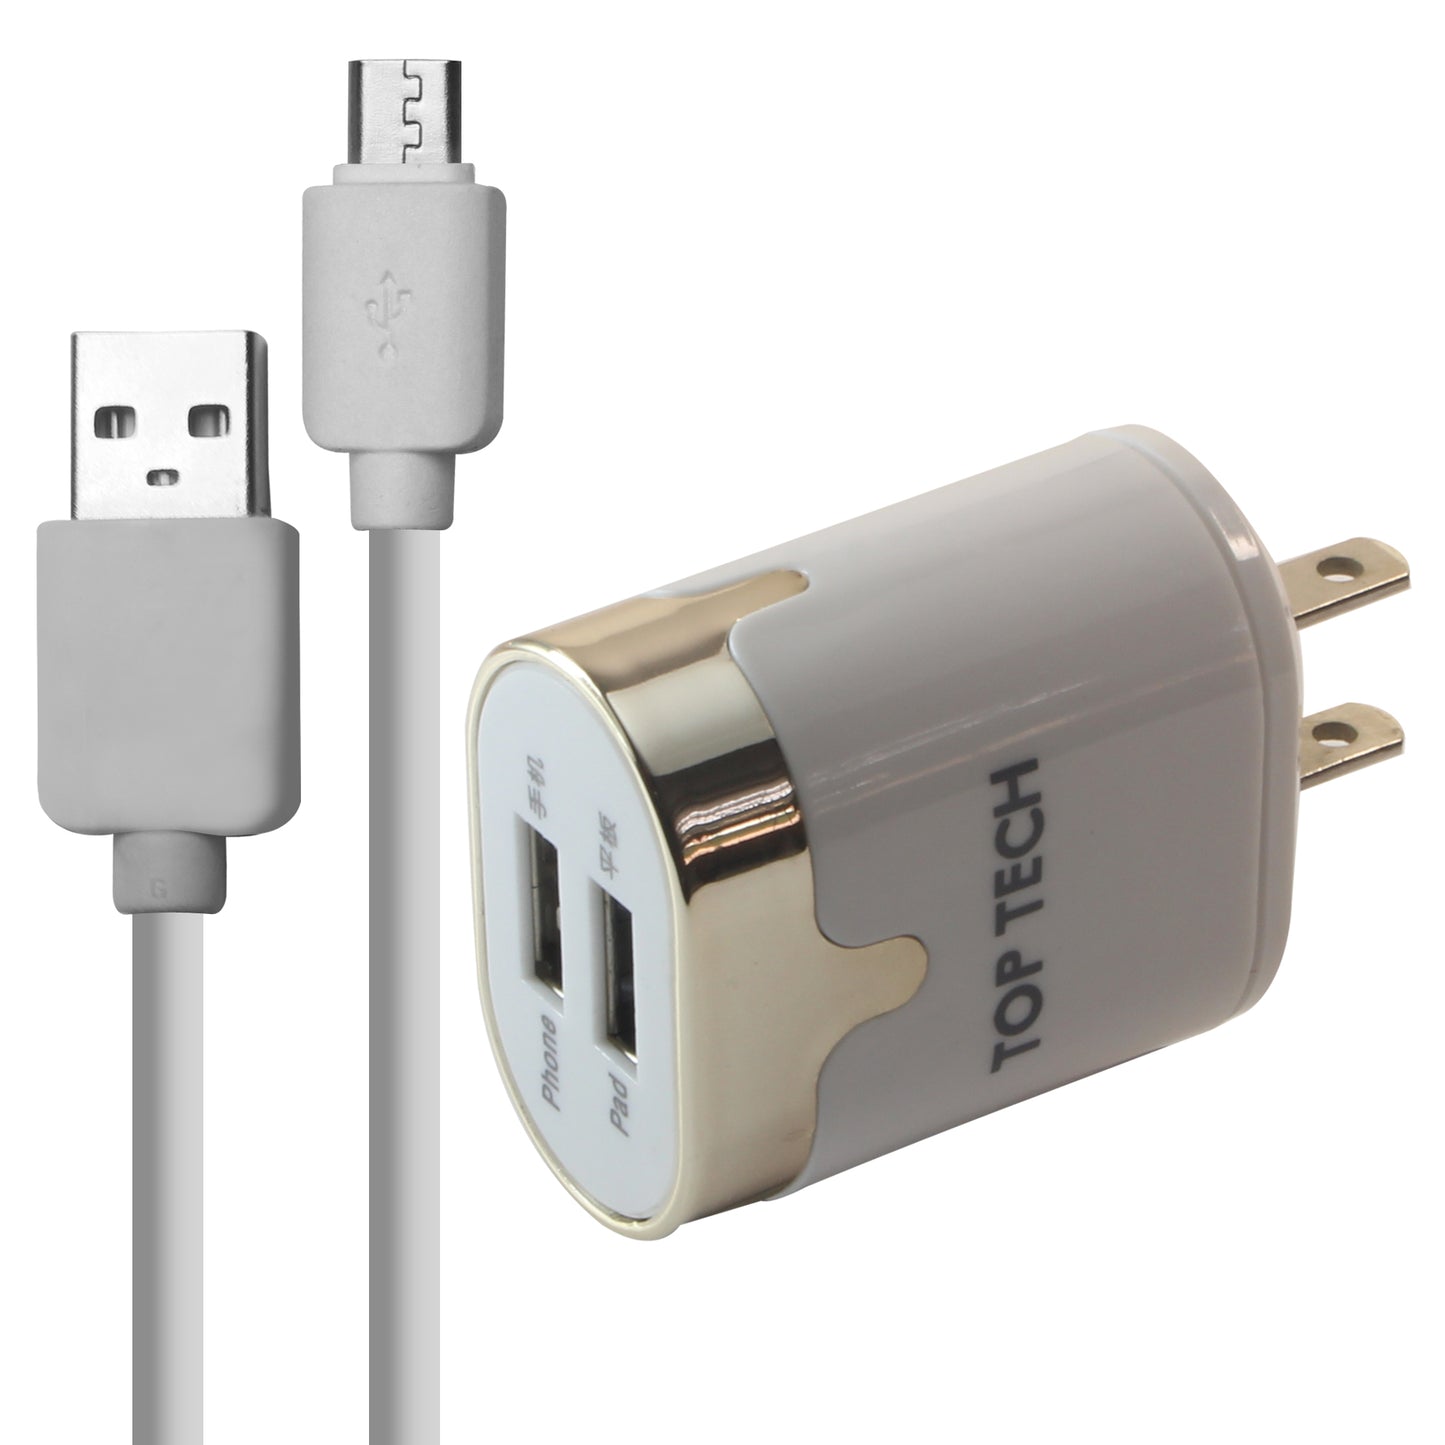 2.4A Dual Port Travel Charger + Micro USB Cable (6 Ft.)